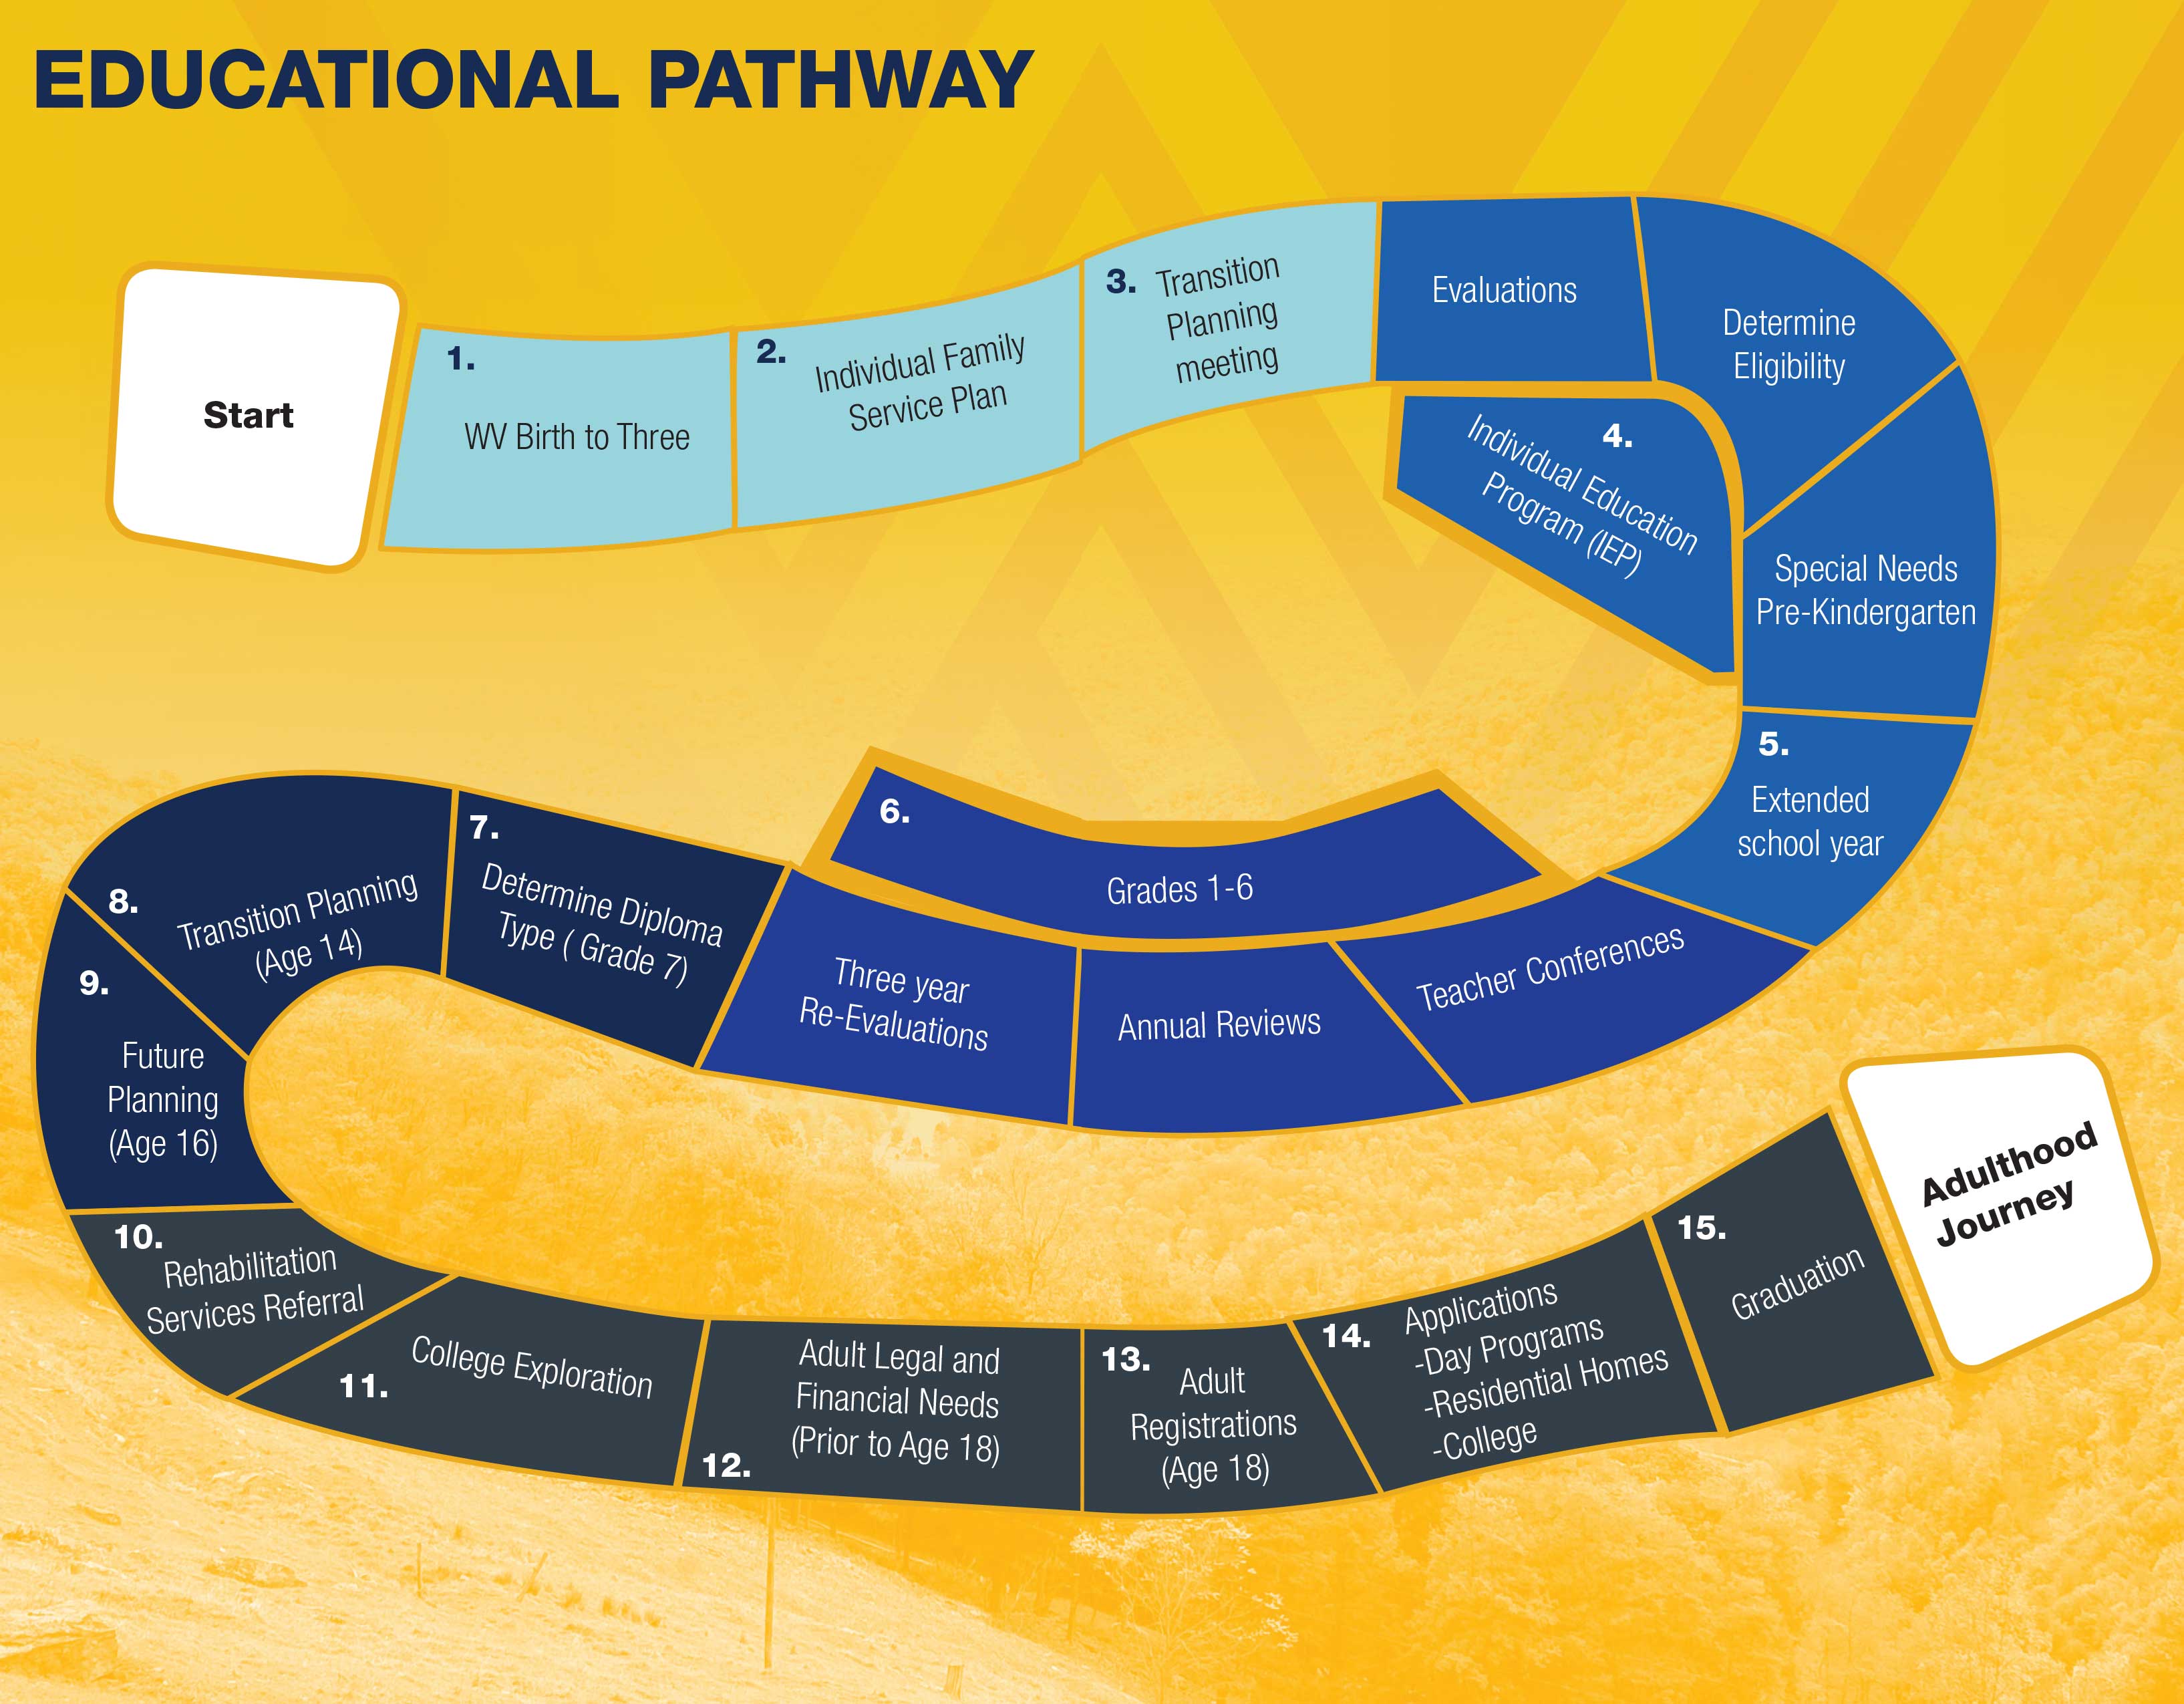  the pathway from the handout